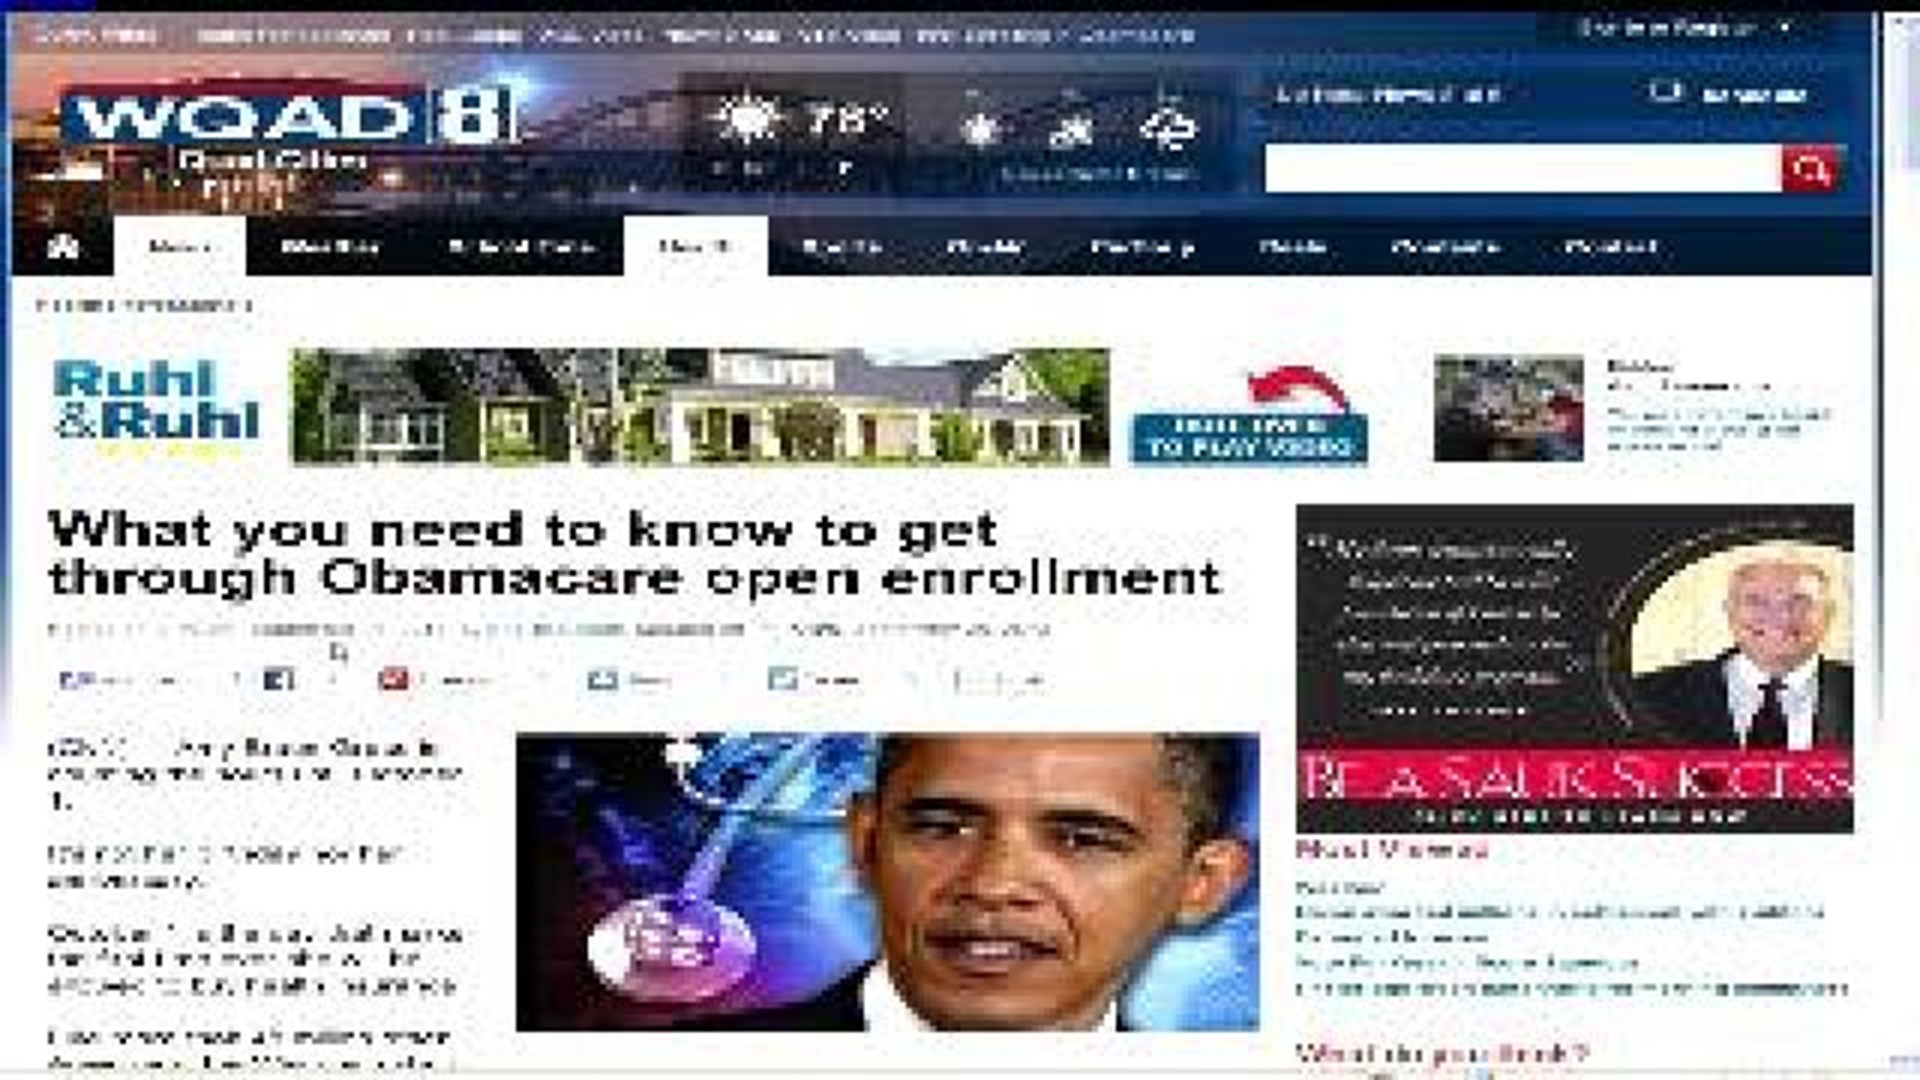 Obamacare enrollment to begin- what you need to know